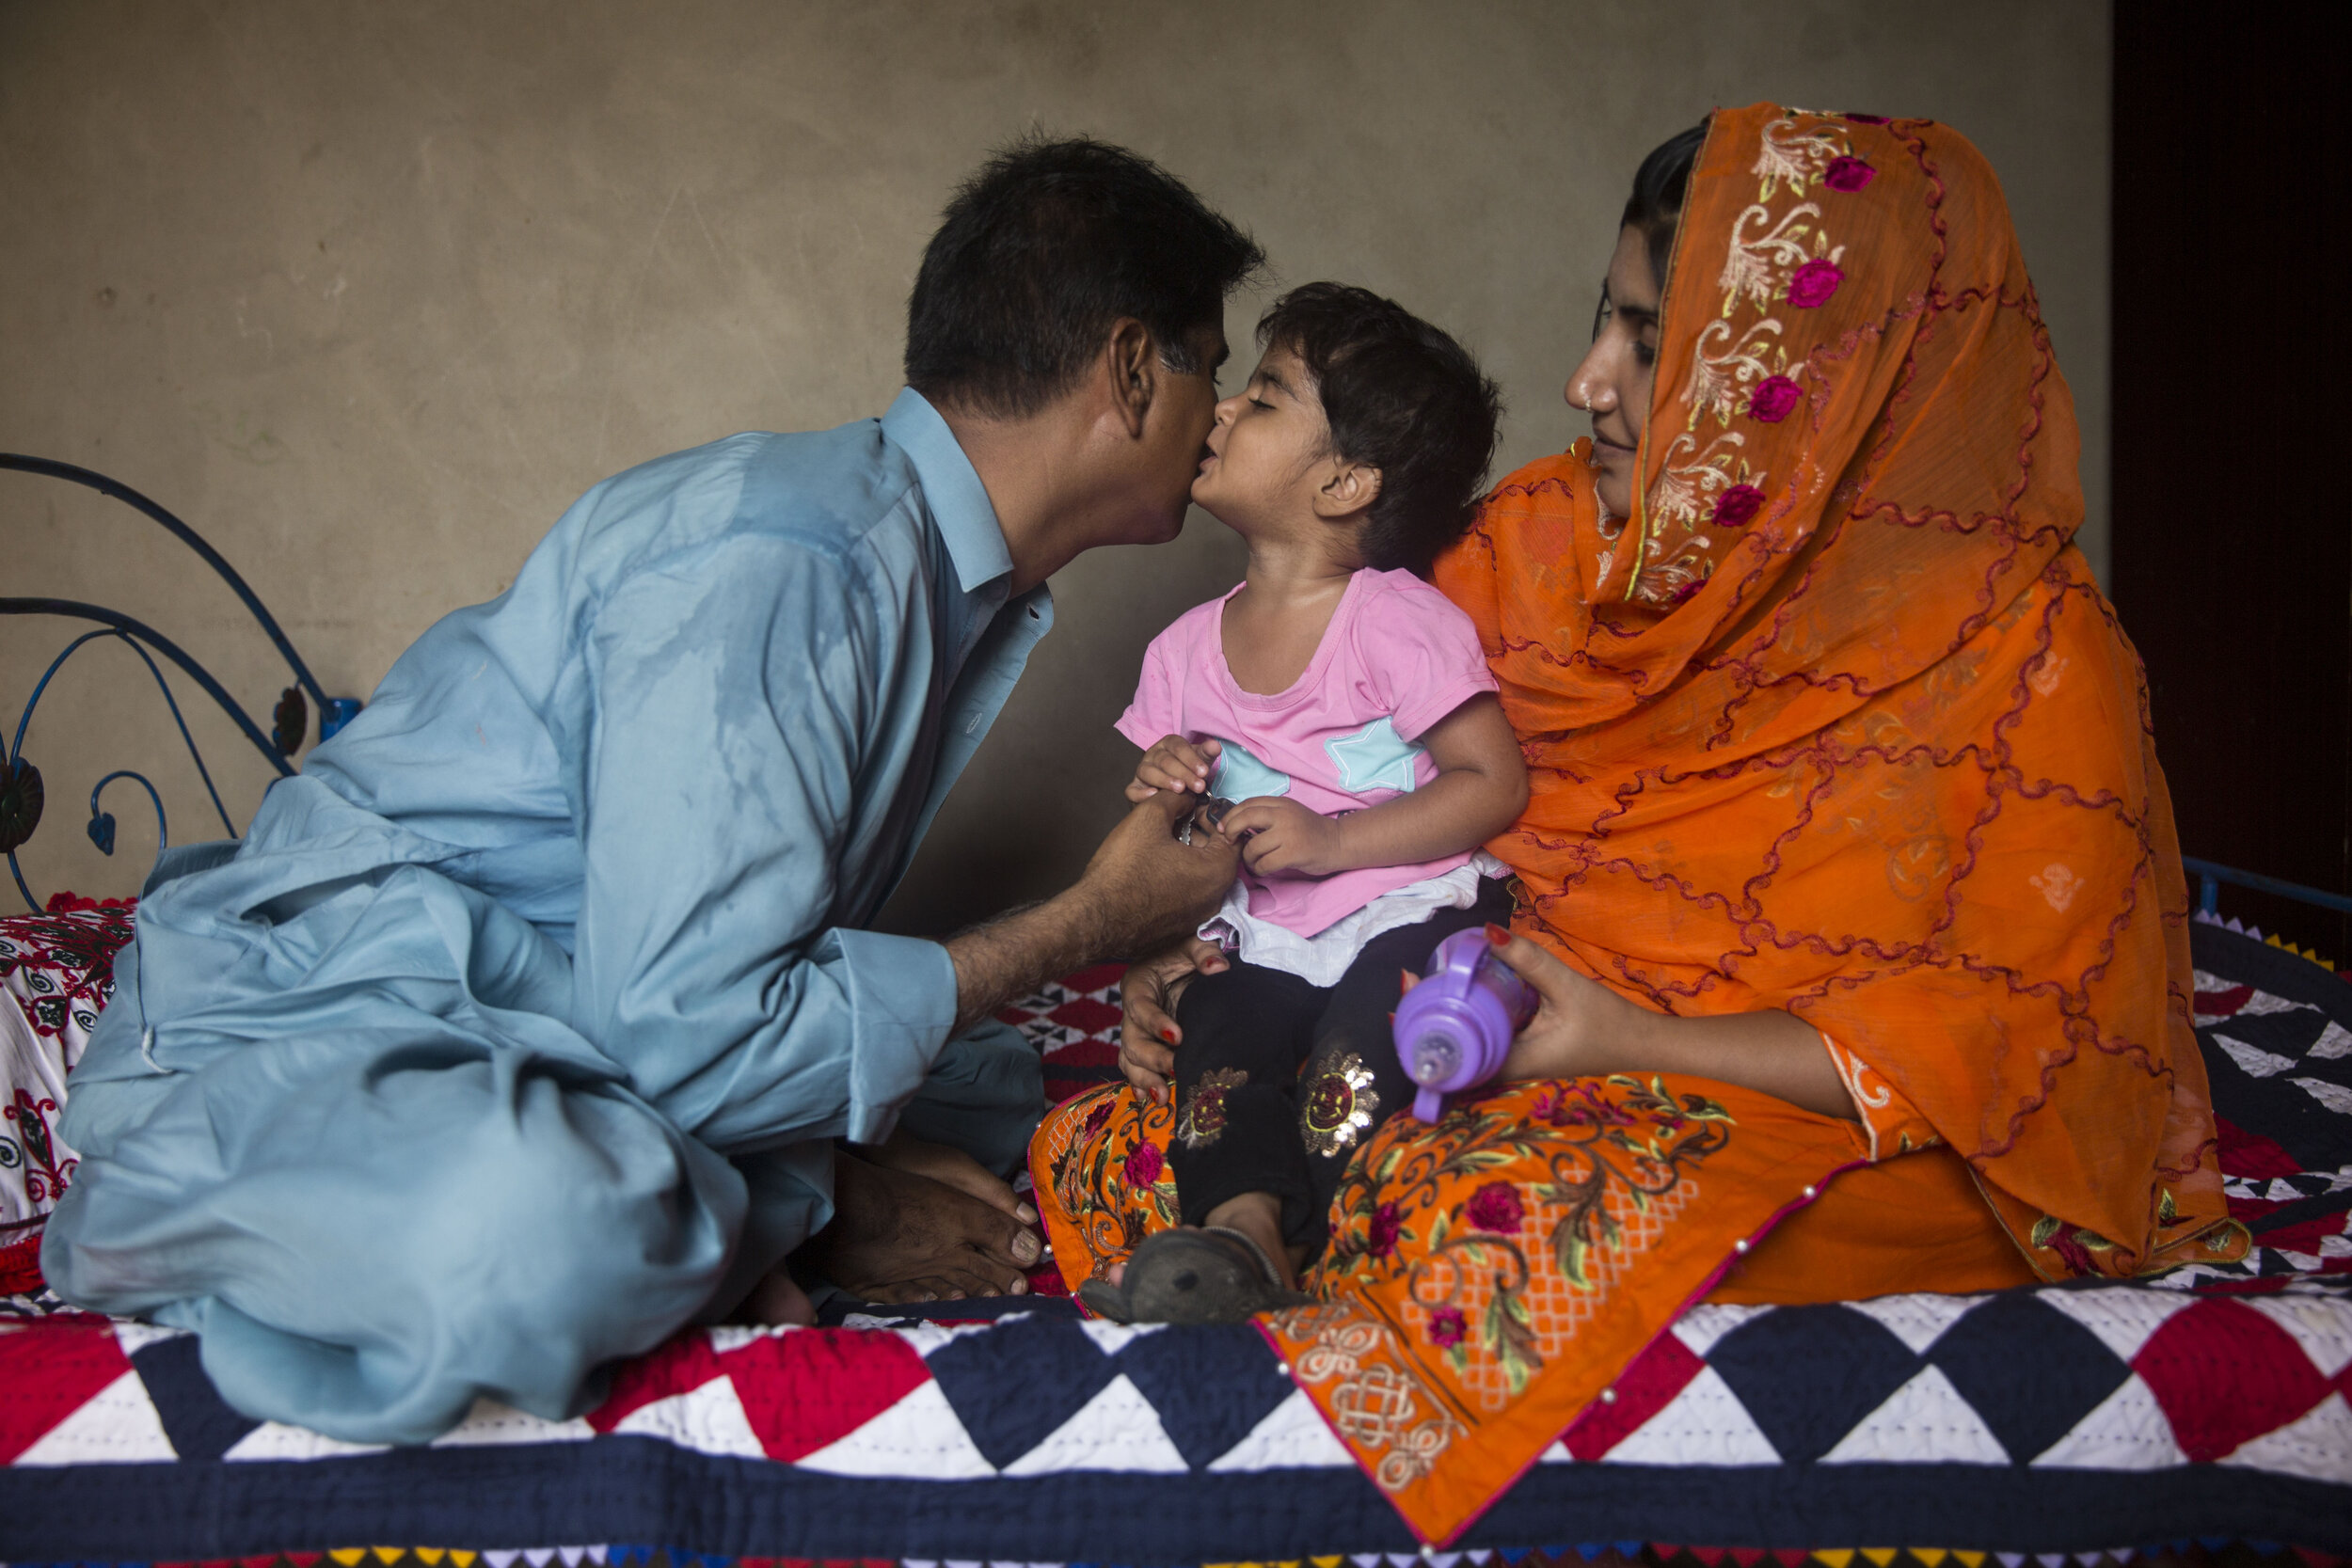  2-year-old Rida Batool who has been diagnosed with HIV along with her parents at their residence on July 24, 2019 in Ratodero, Sind, Pakistan. 